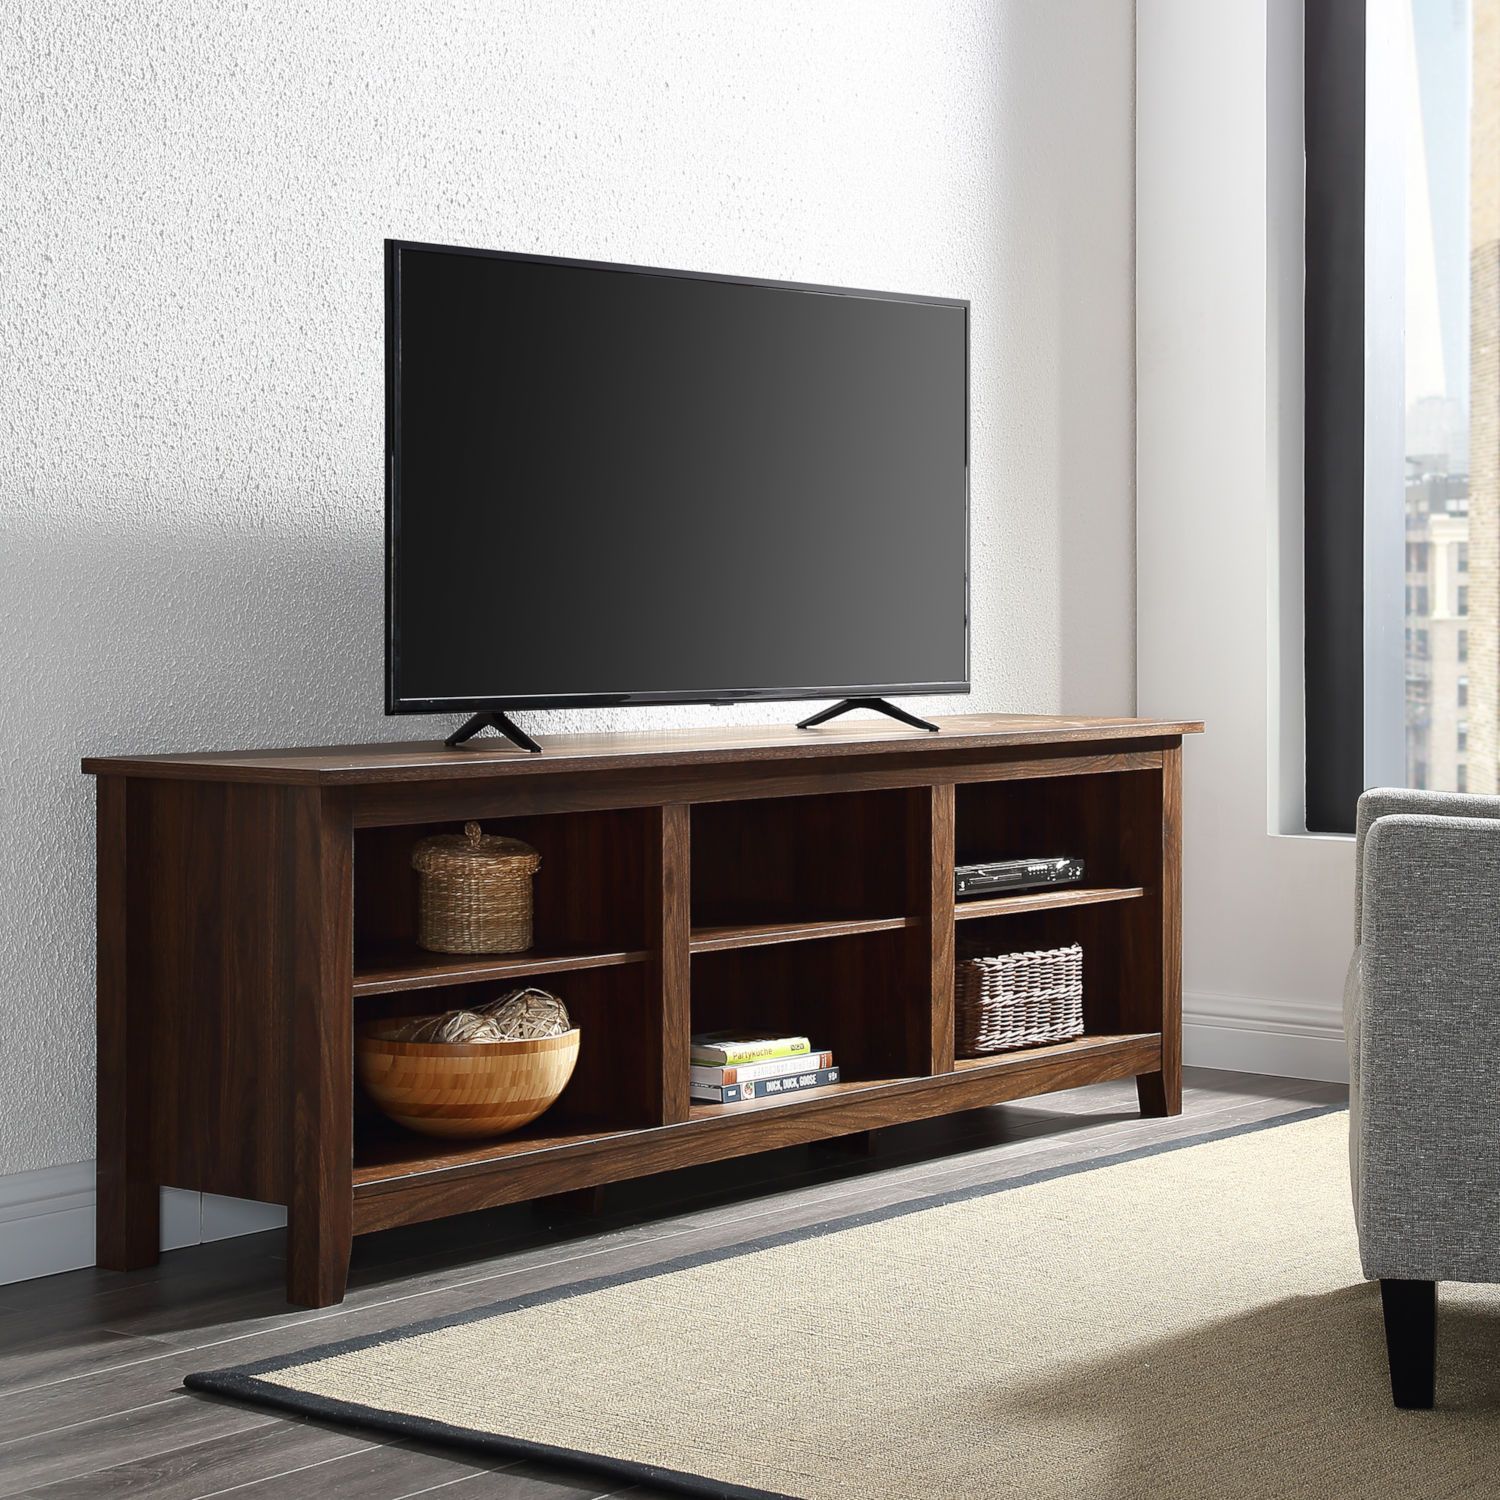 Walker Edison Furniture Co. Tv Stand W70csp | Bellacor In Intended For Dark Wood Tv Cabinets (Photo 1 of 15)